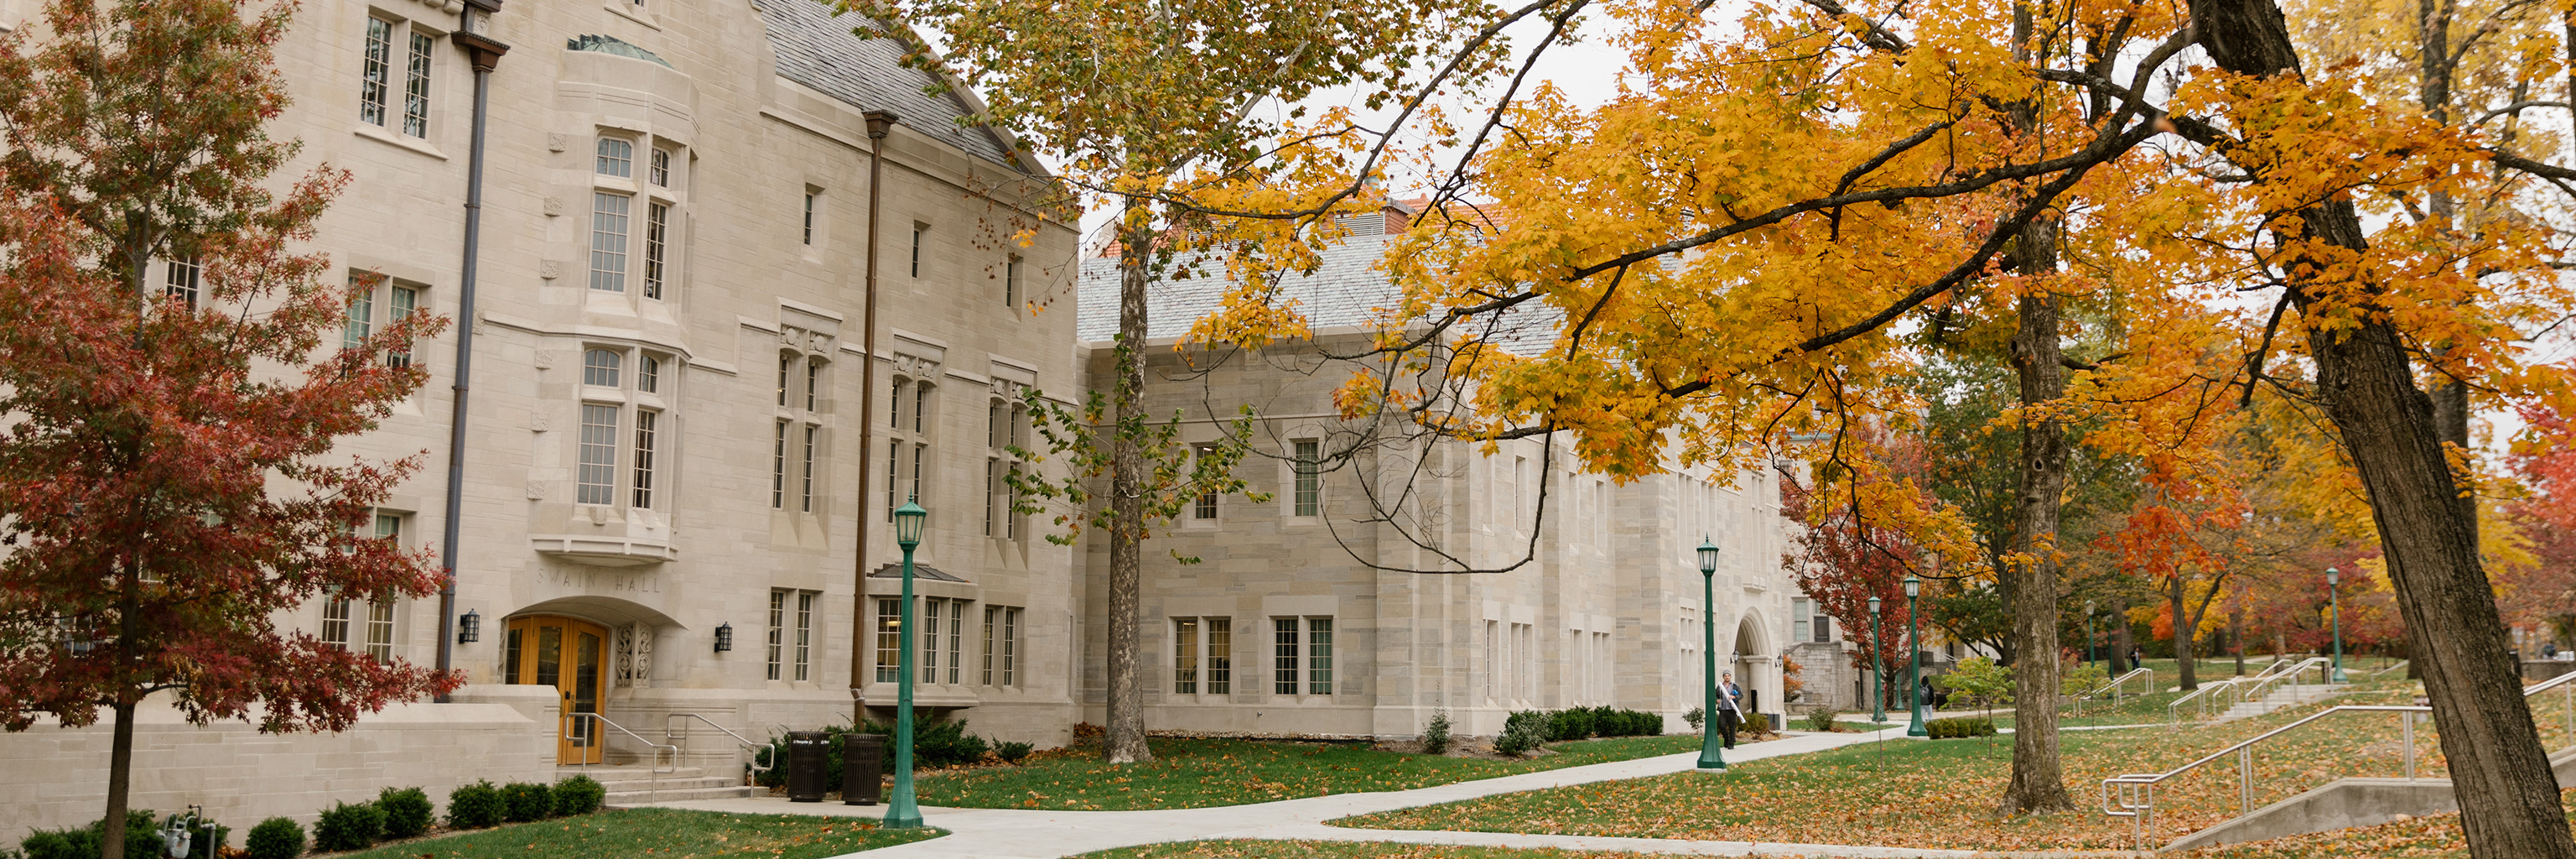 Exterior view of Swain Hall West